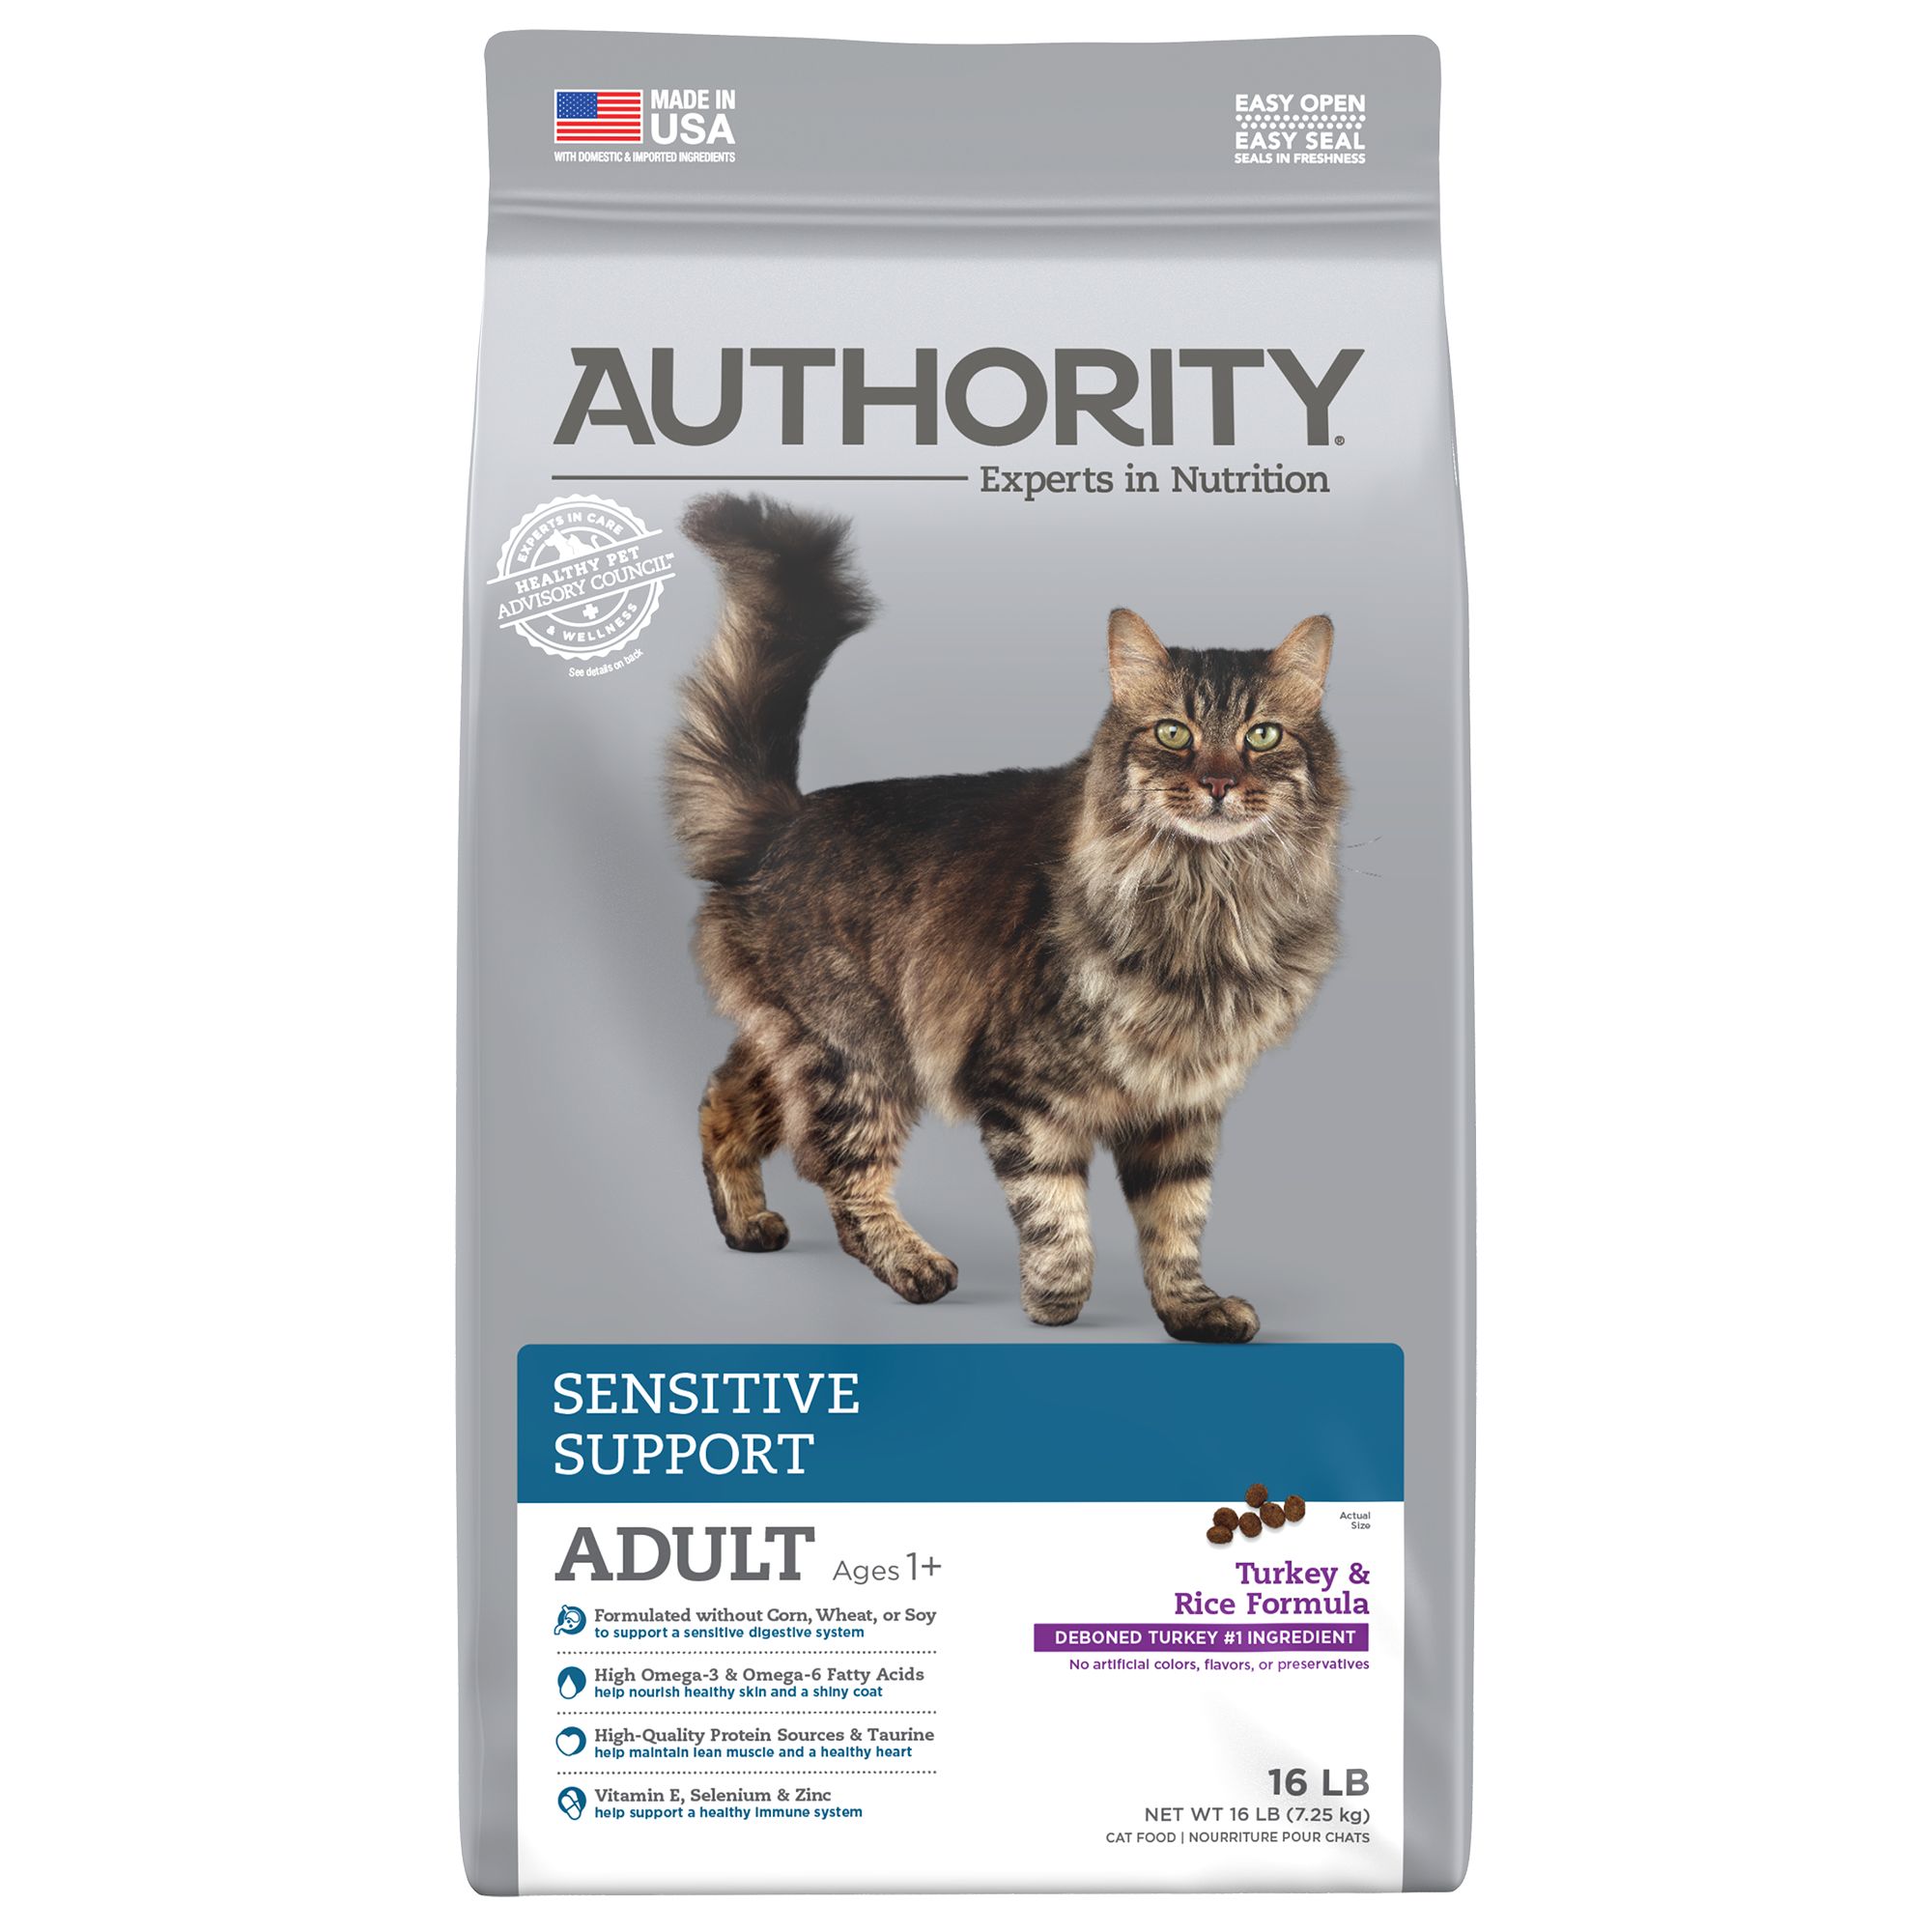 Purina® Cat Chow® Gentle Digestive Care Adult Cat Food cat Dry Food